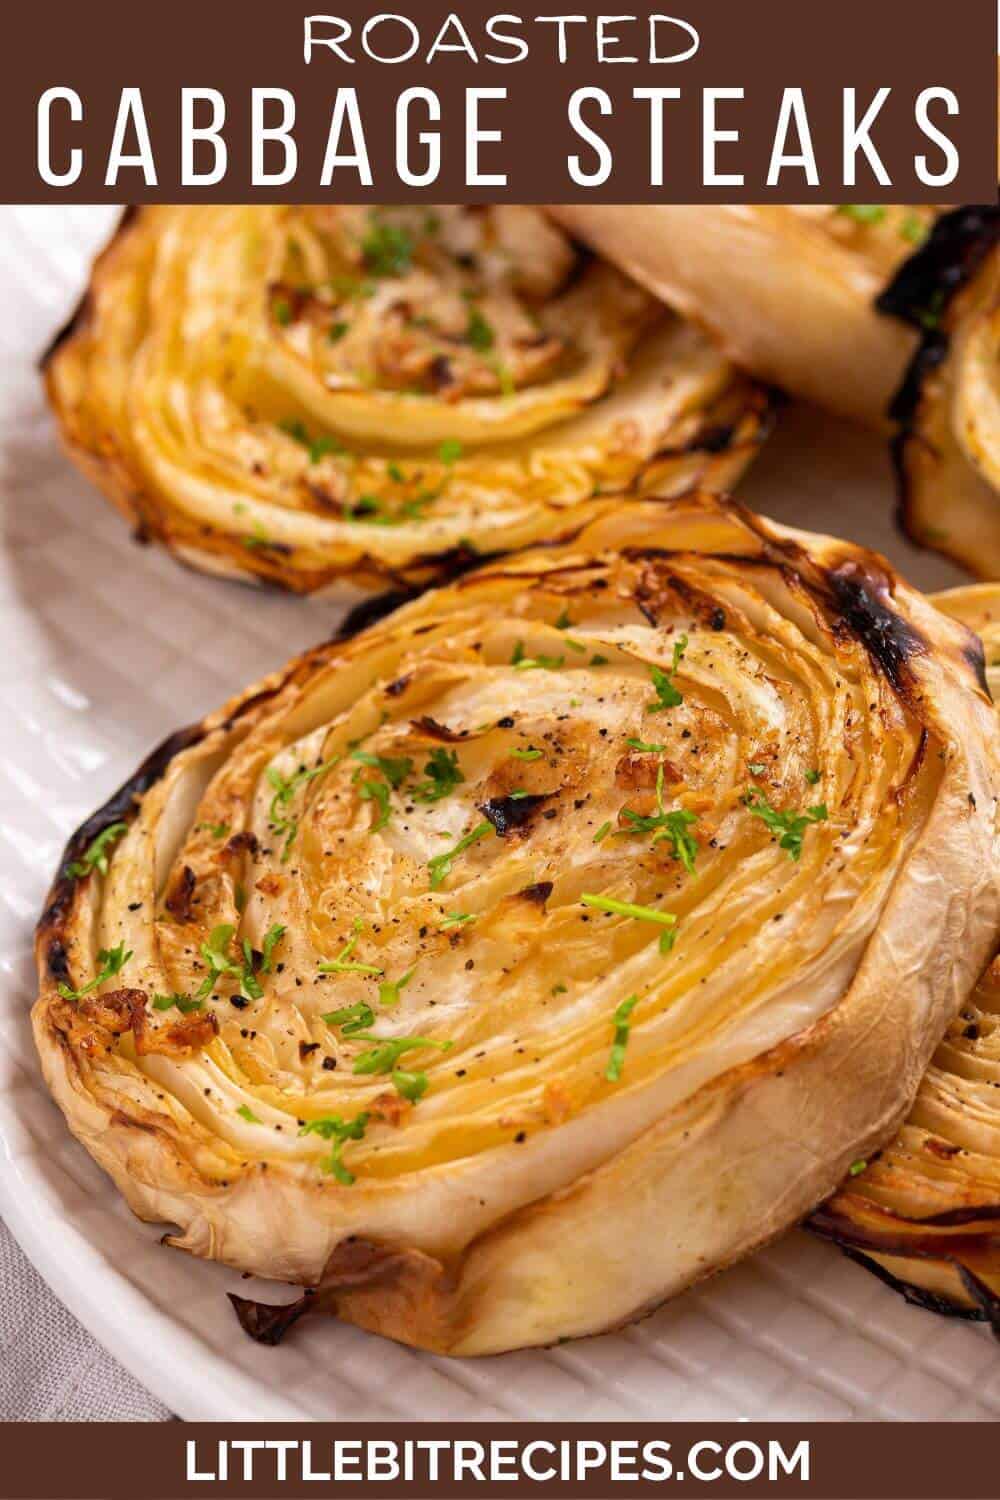 Roasted cabbage steaks with text.